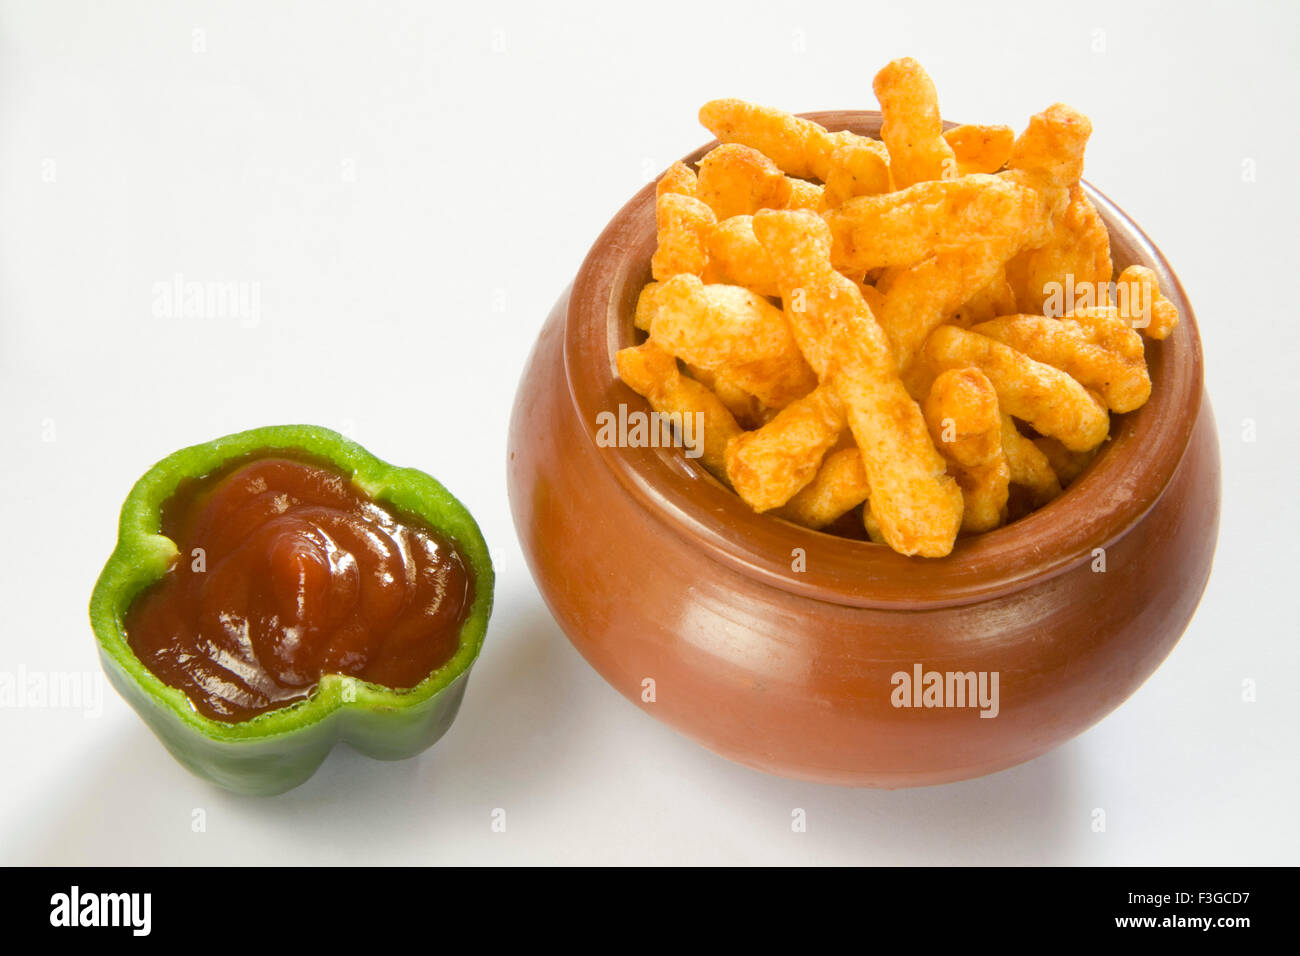 Snack junk food crisp crunchy and spicy deep fry in oil rice flour served tomato ketchup served matka chopped capsicum Stock Photo